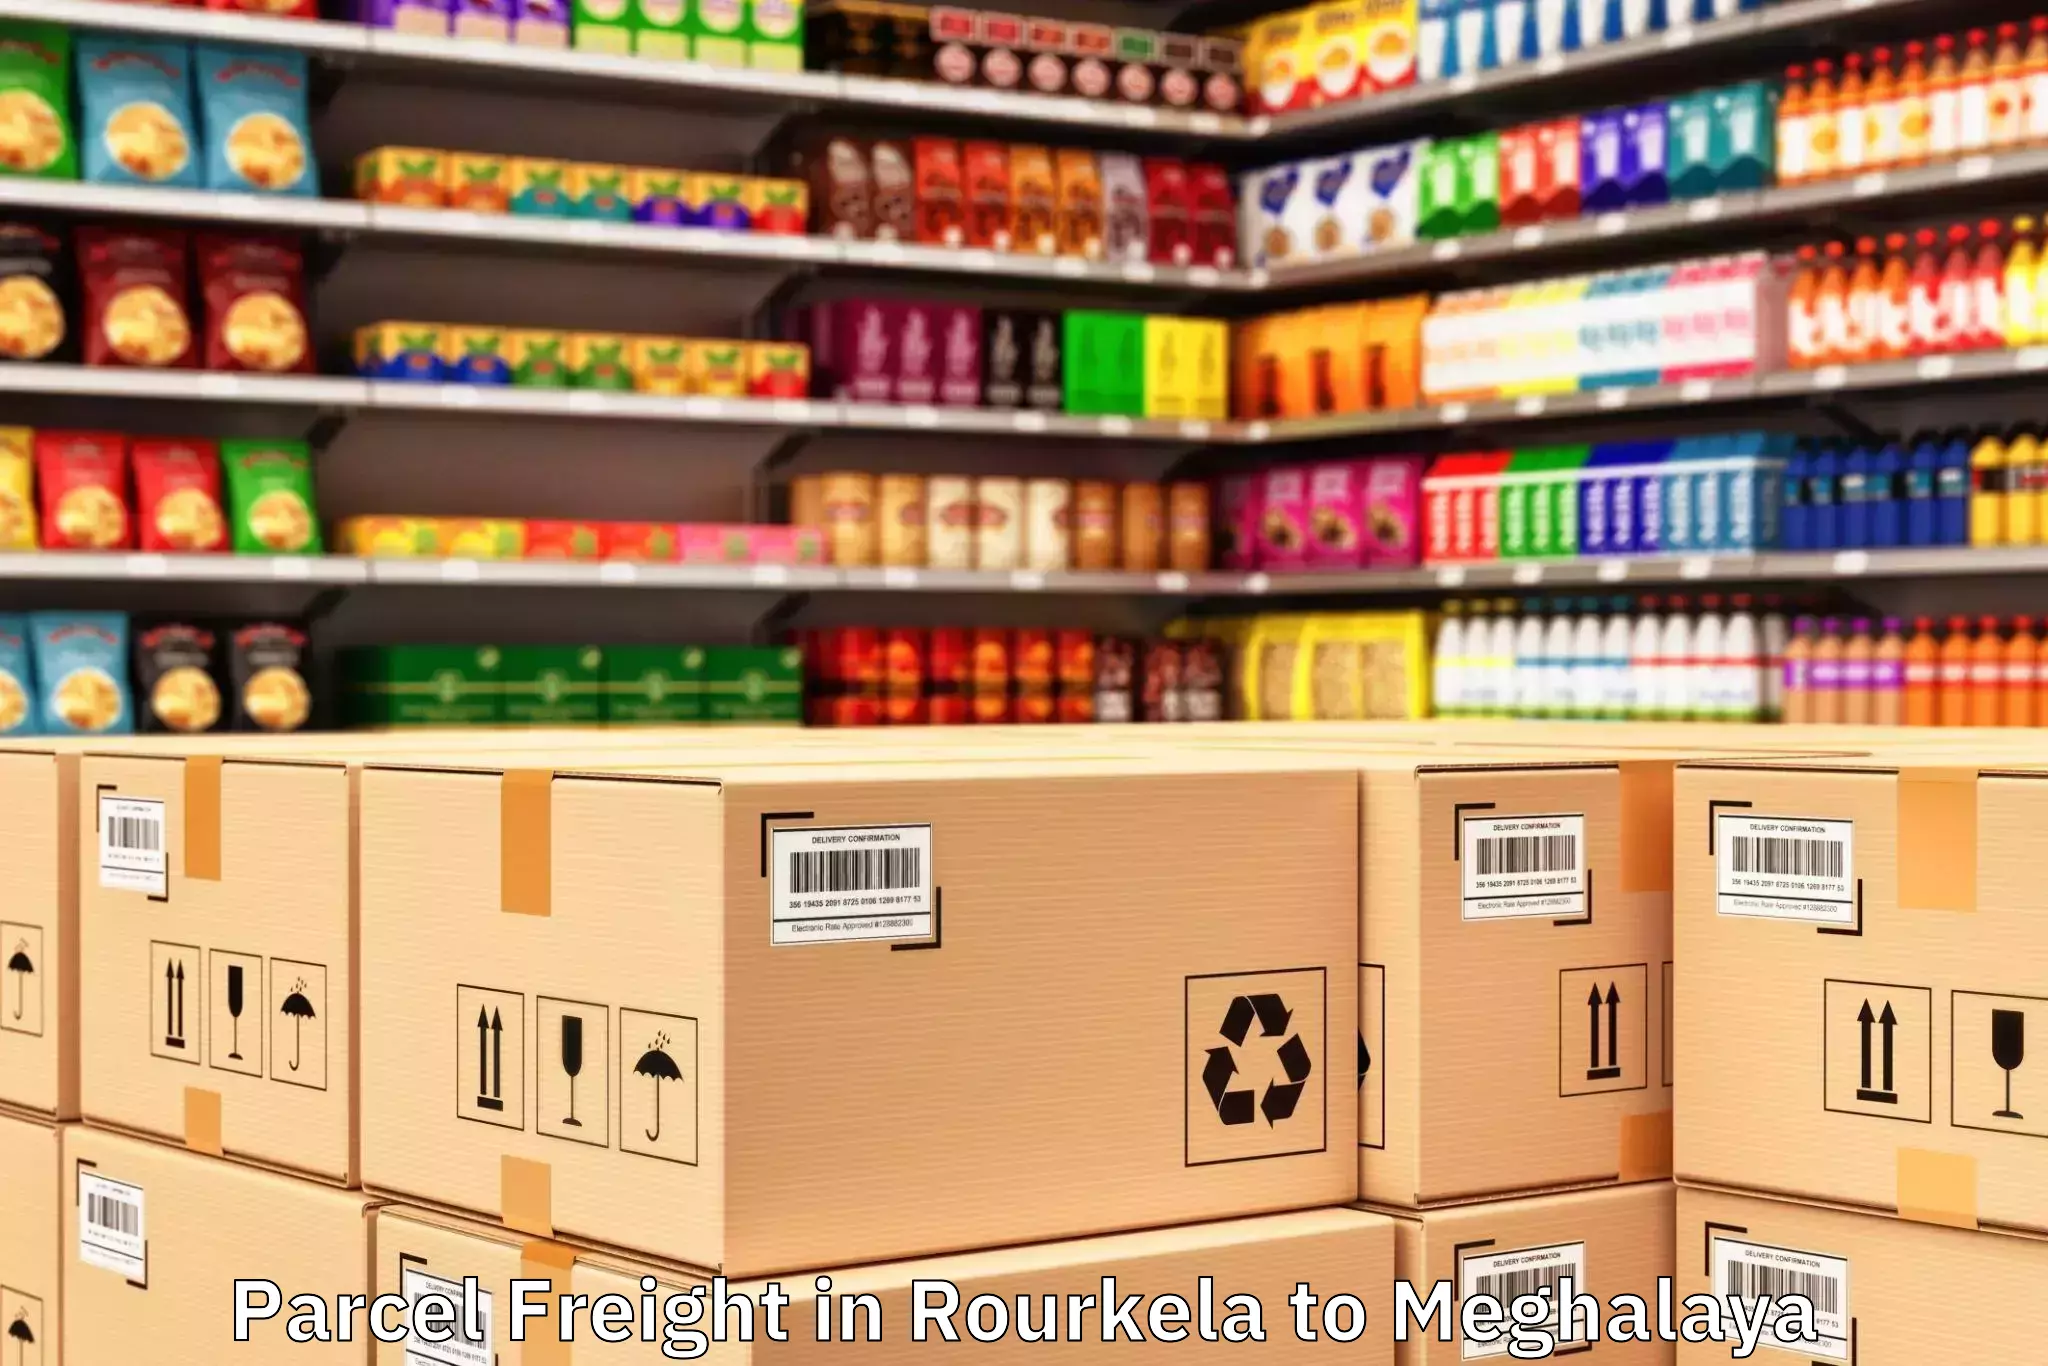 Professional Rourkela to Umsning Parcel Freight